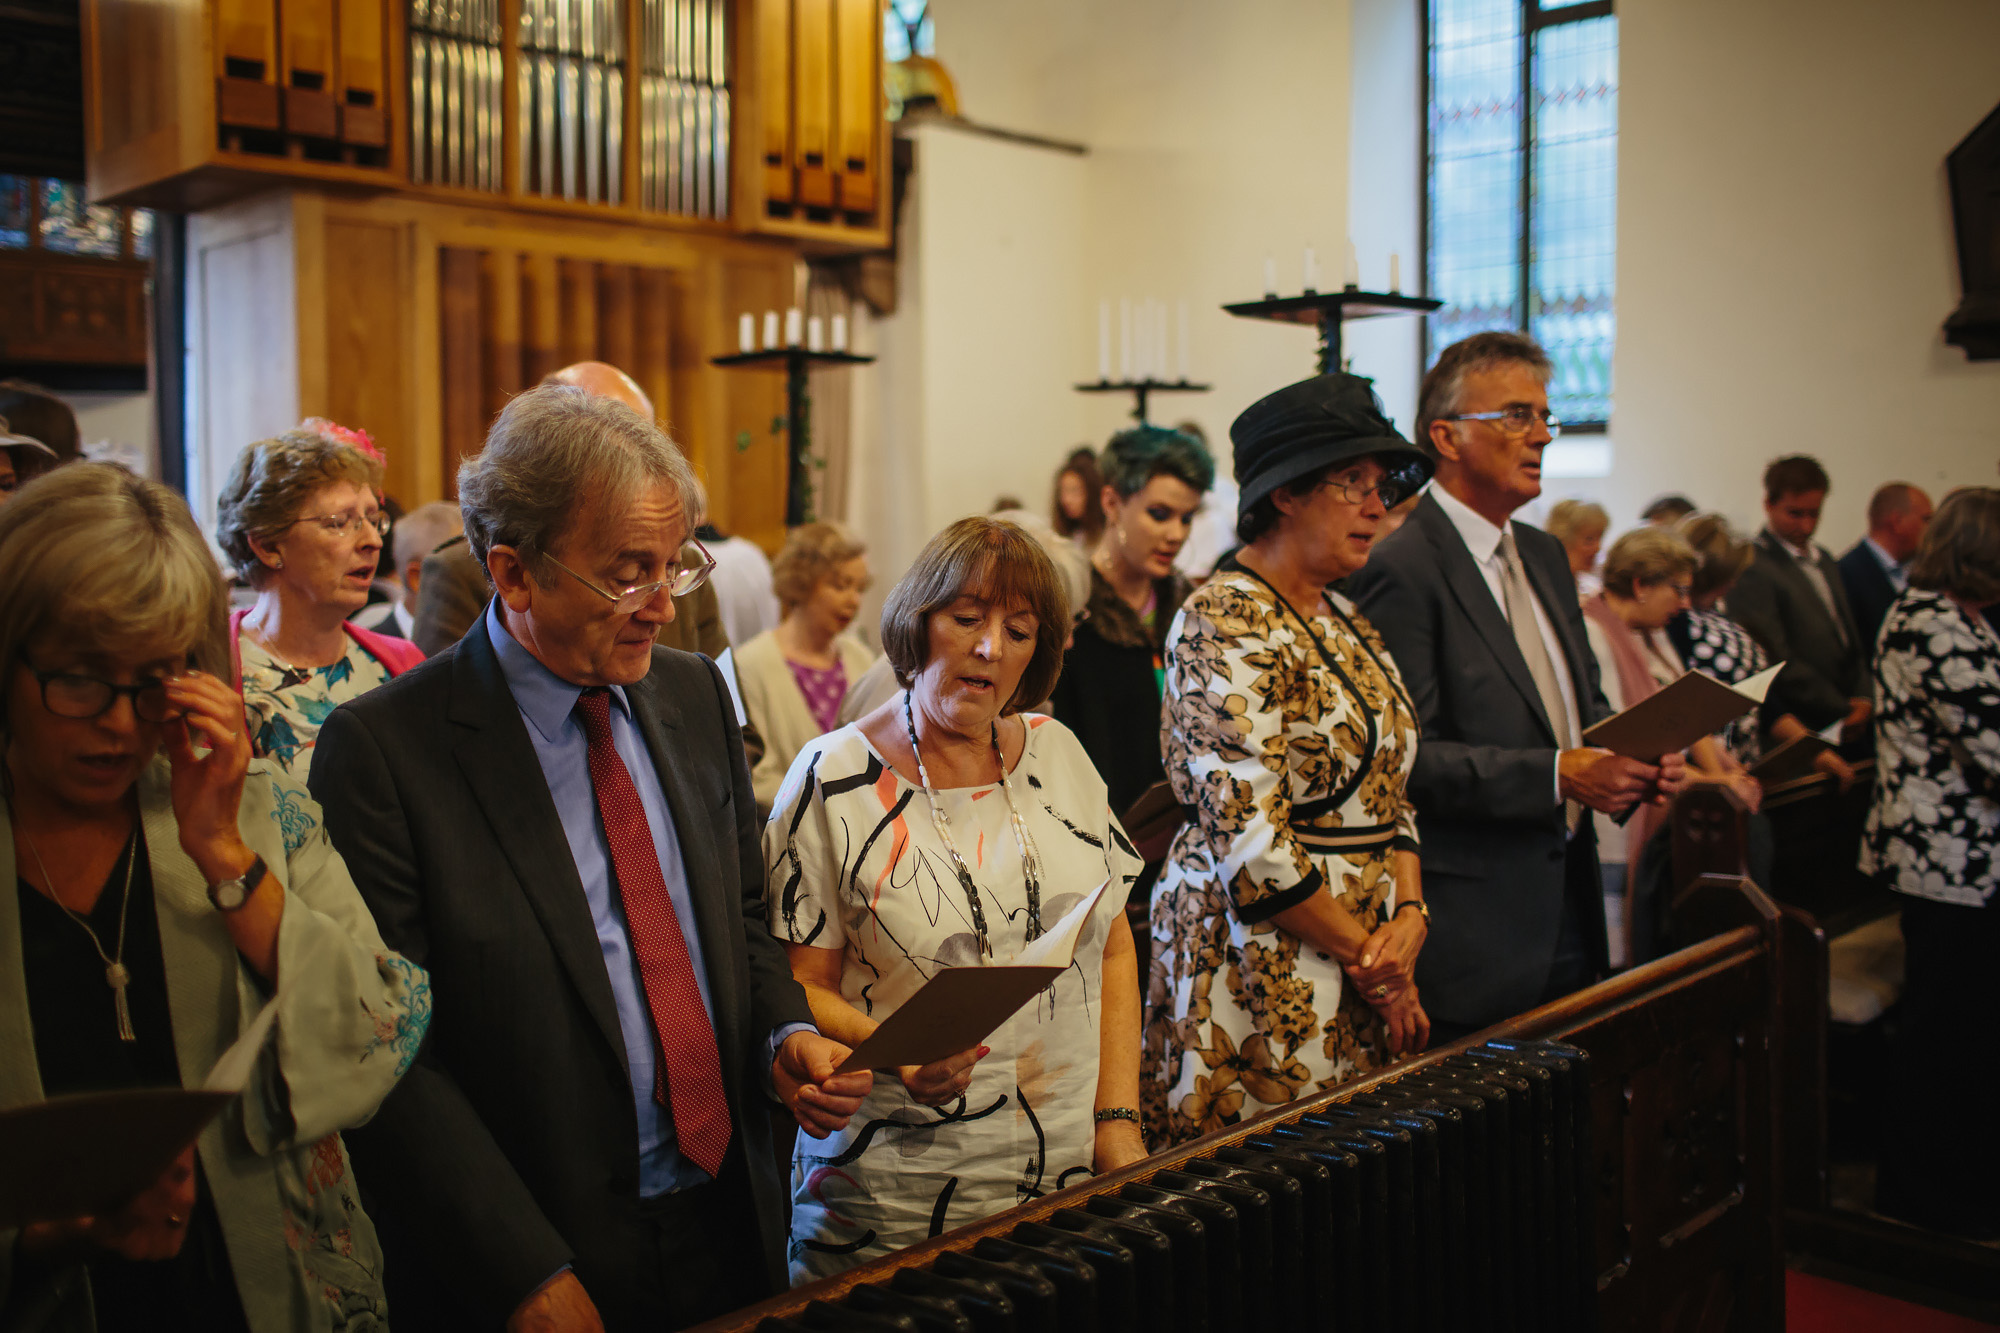 Wedding guests singing hymns in the church ceremony